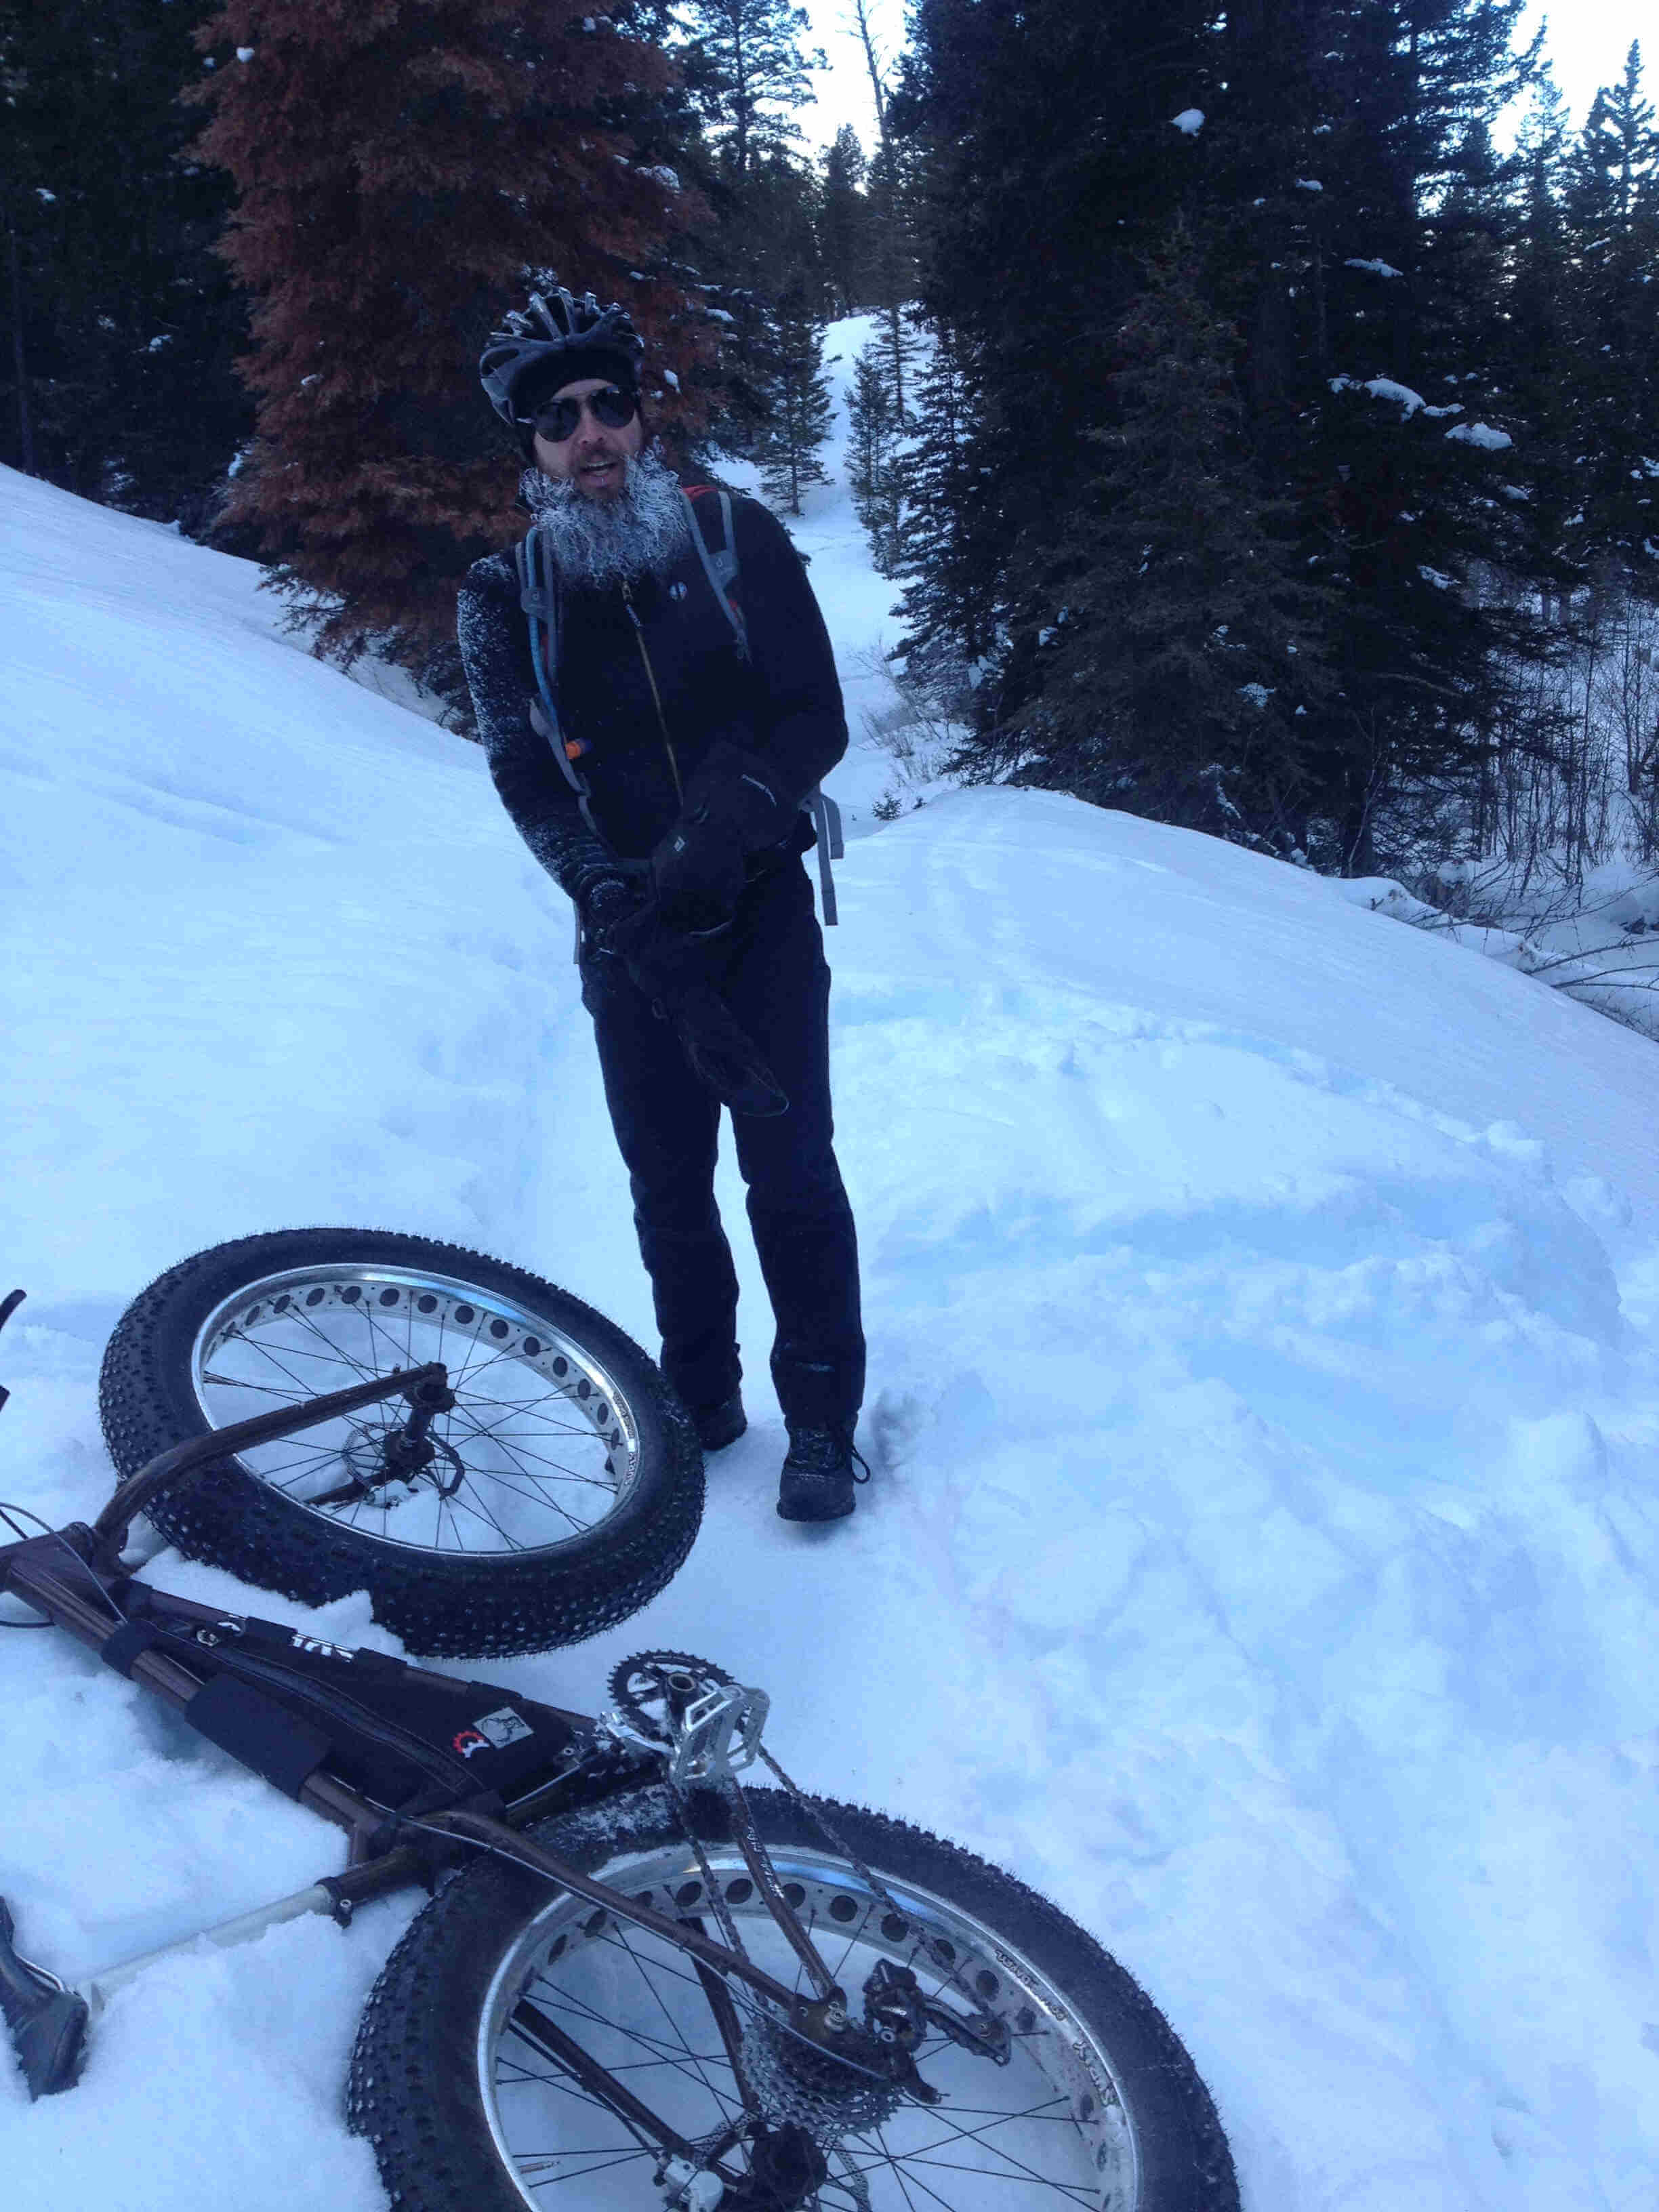 Front view of a cyclist with frozen beard, standing next to a Surly fat bike on it's side, on a snowy trail in a forest